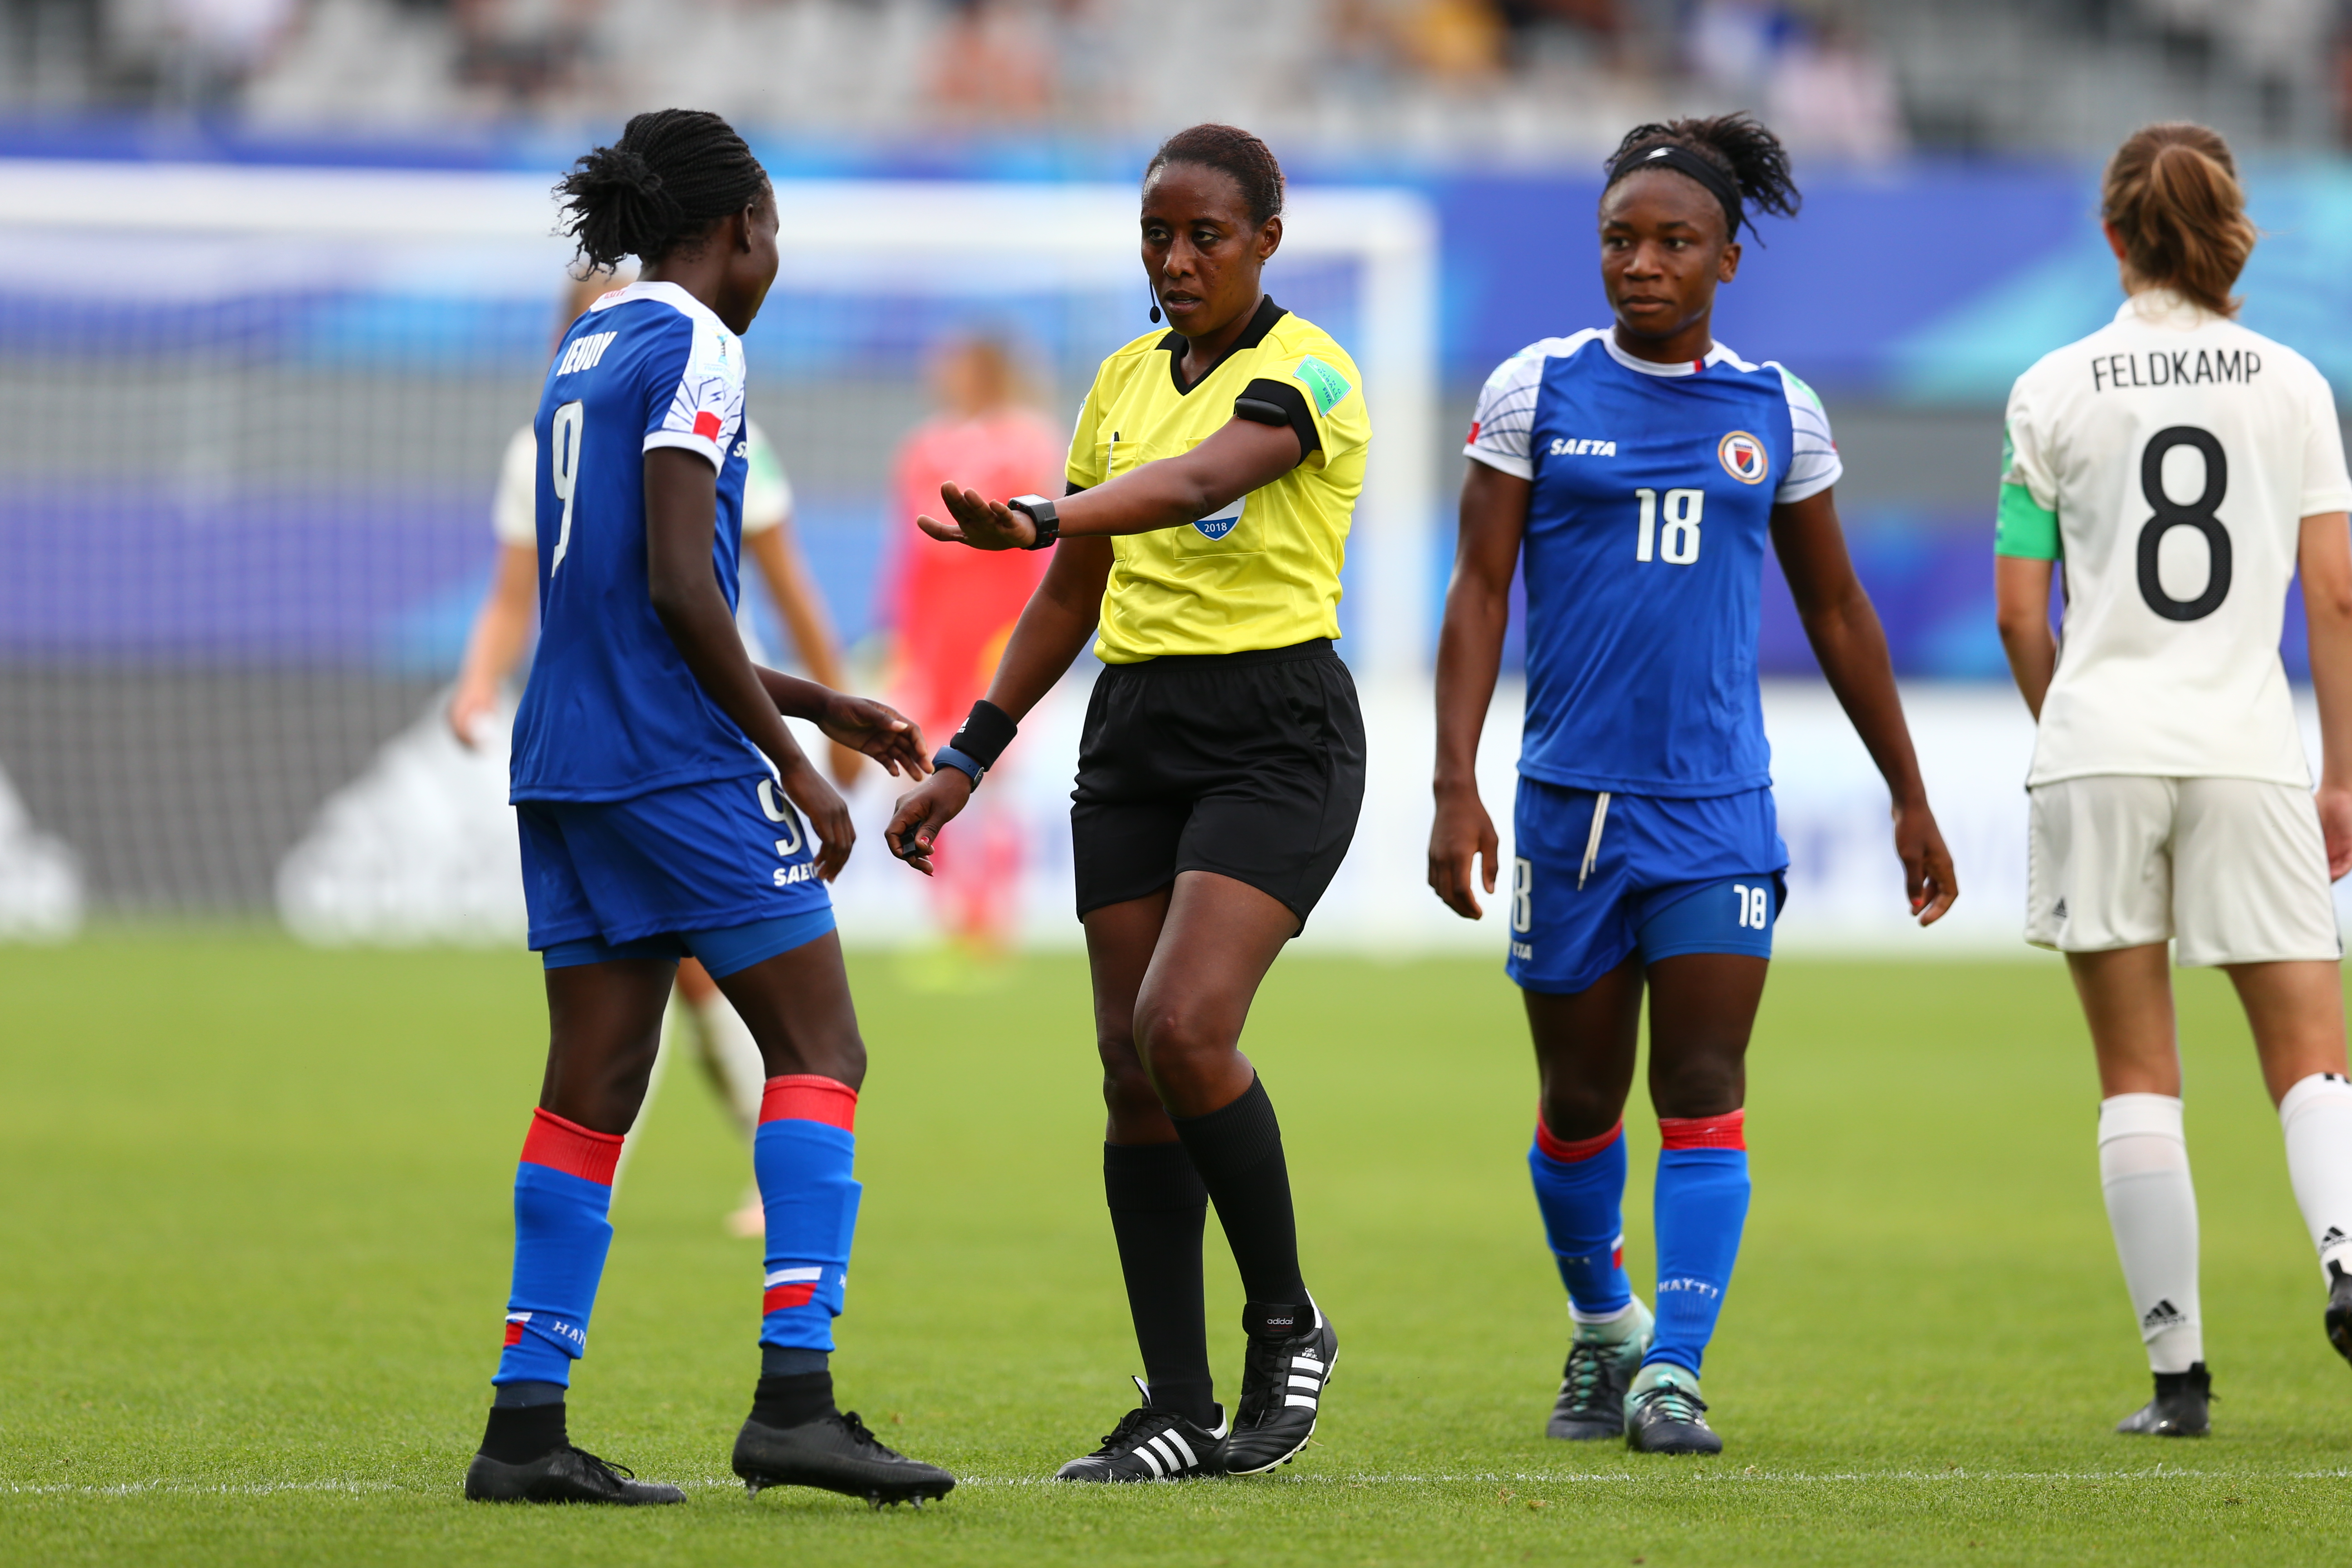 Melchie Dumornay #18 during the FIFA U-20 Women's World Cup France 2018 group D match between Germany and Haiti at Stade de la Rabine on August 13, 2018 in Vannes, France.